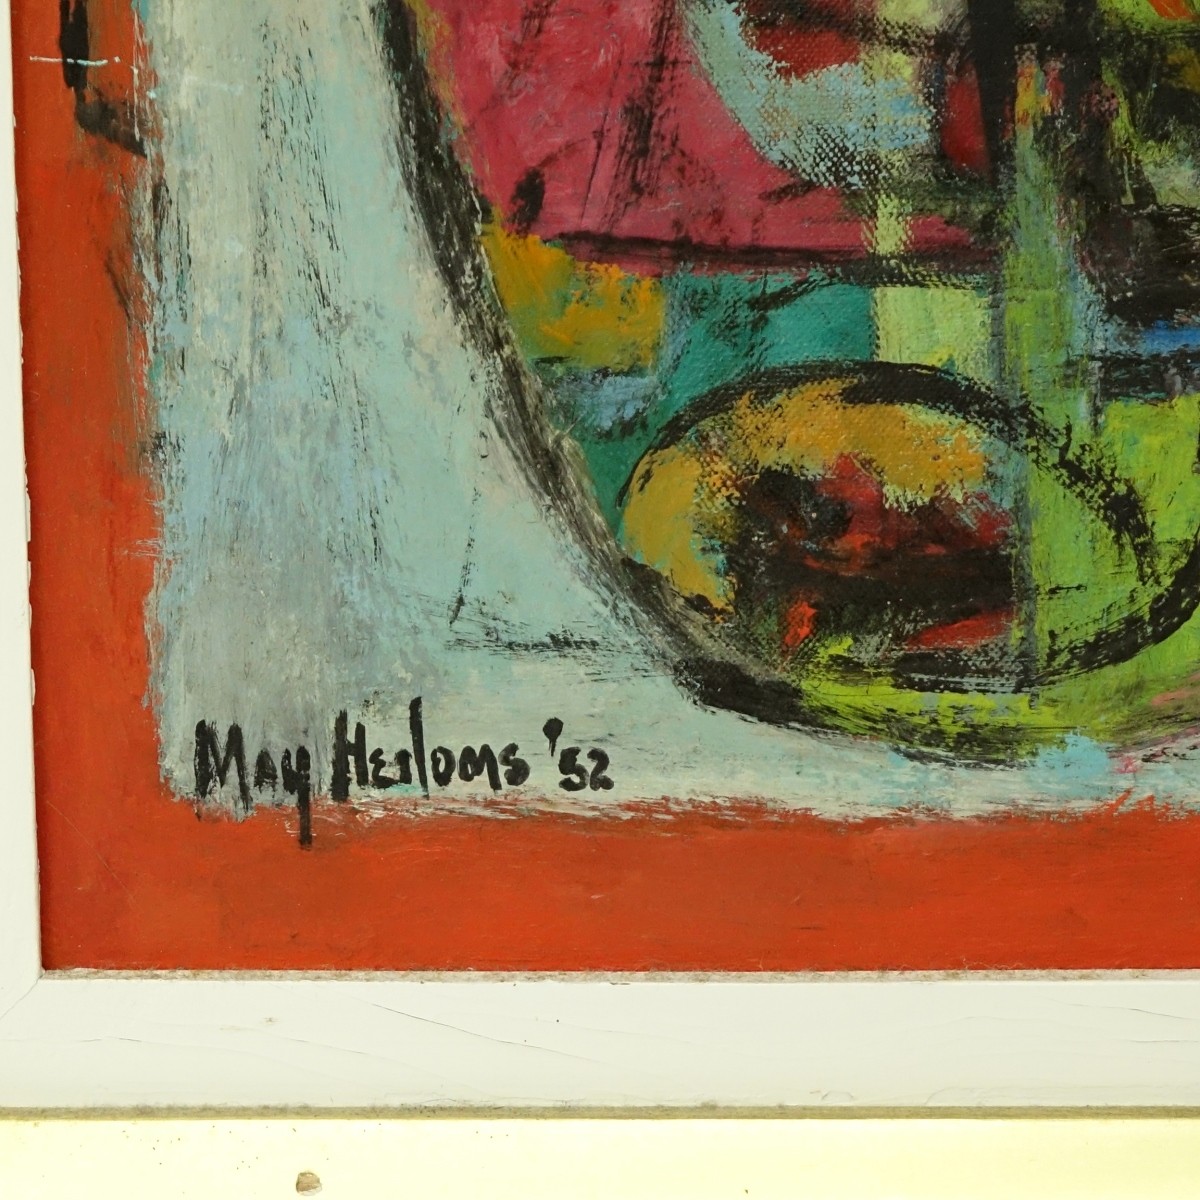 May Heiloms, American (20th century) Oil on Canvas